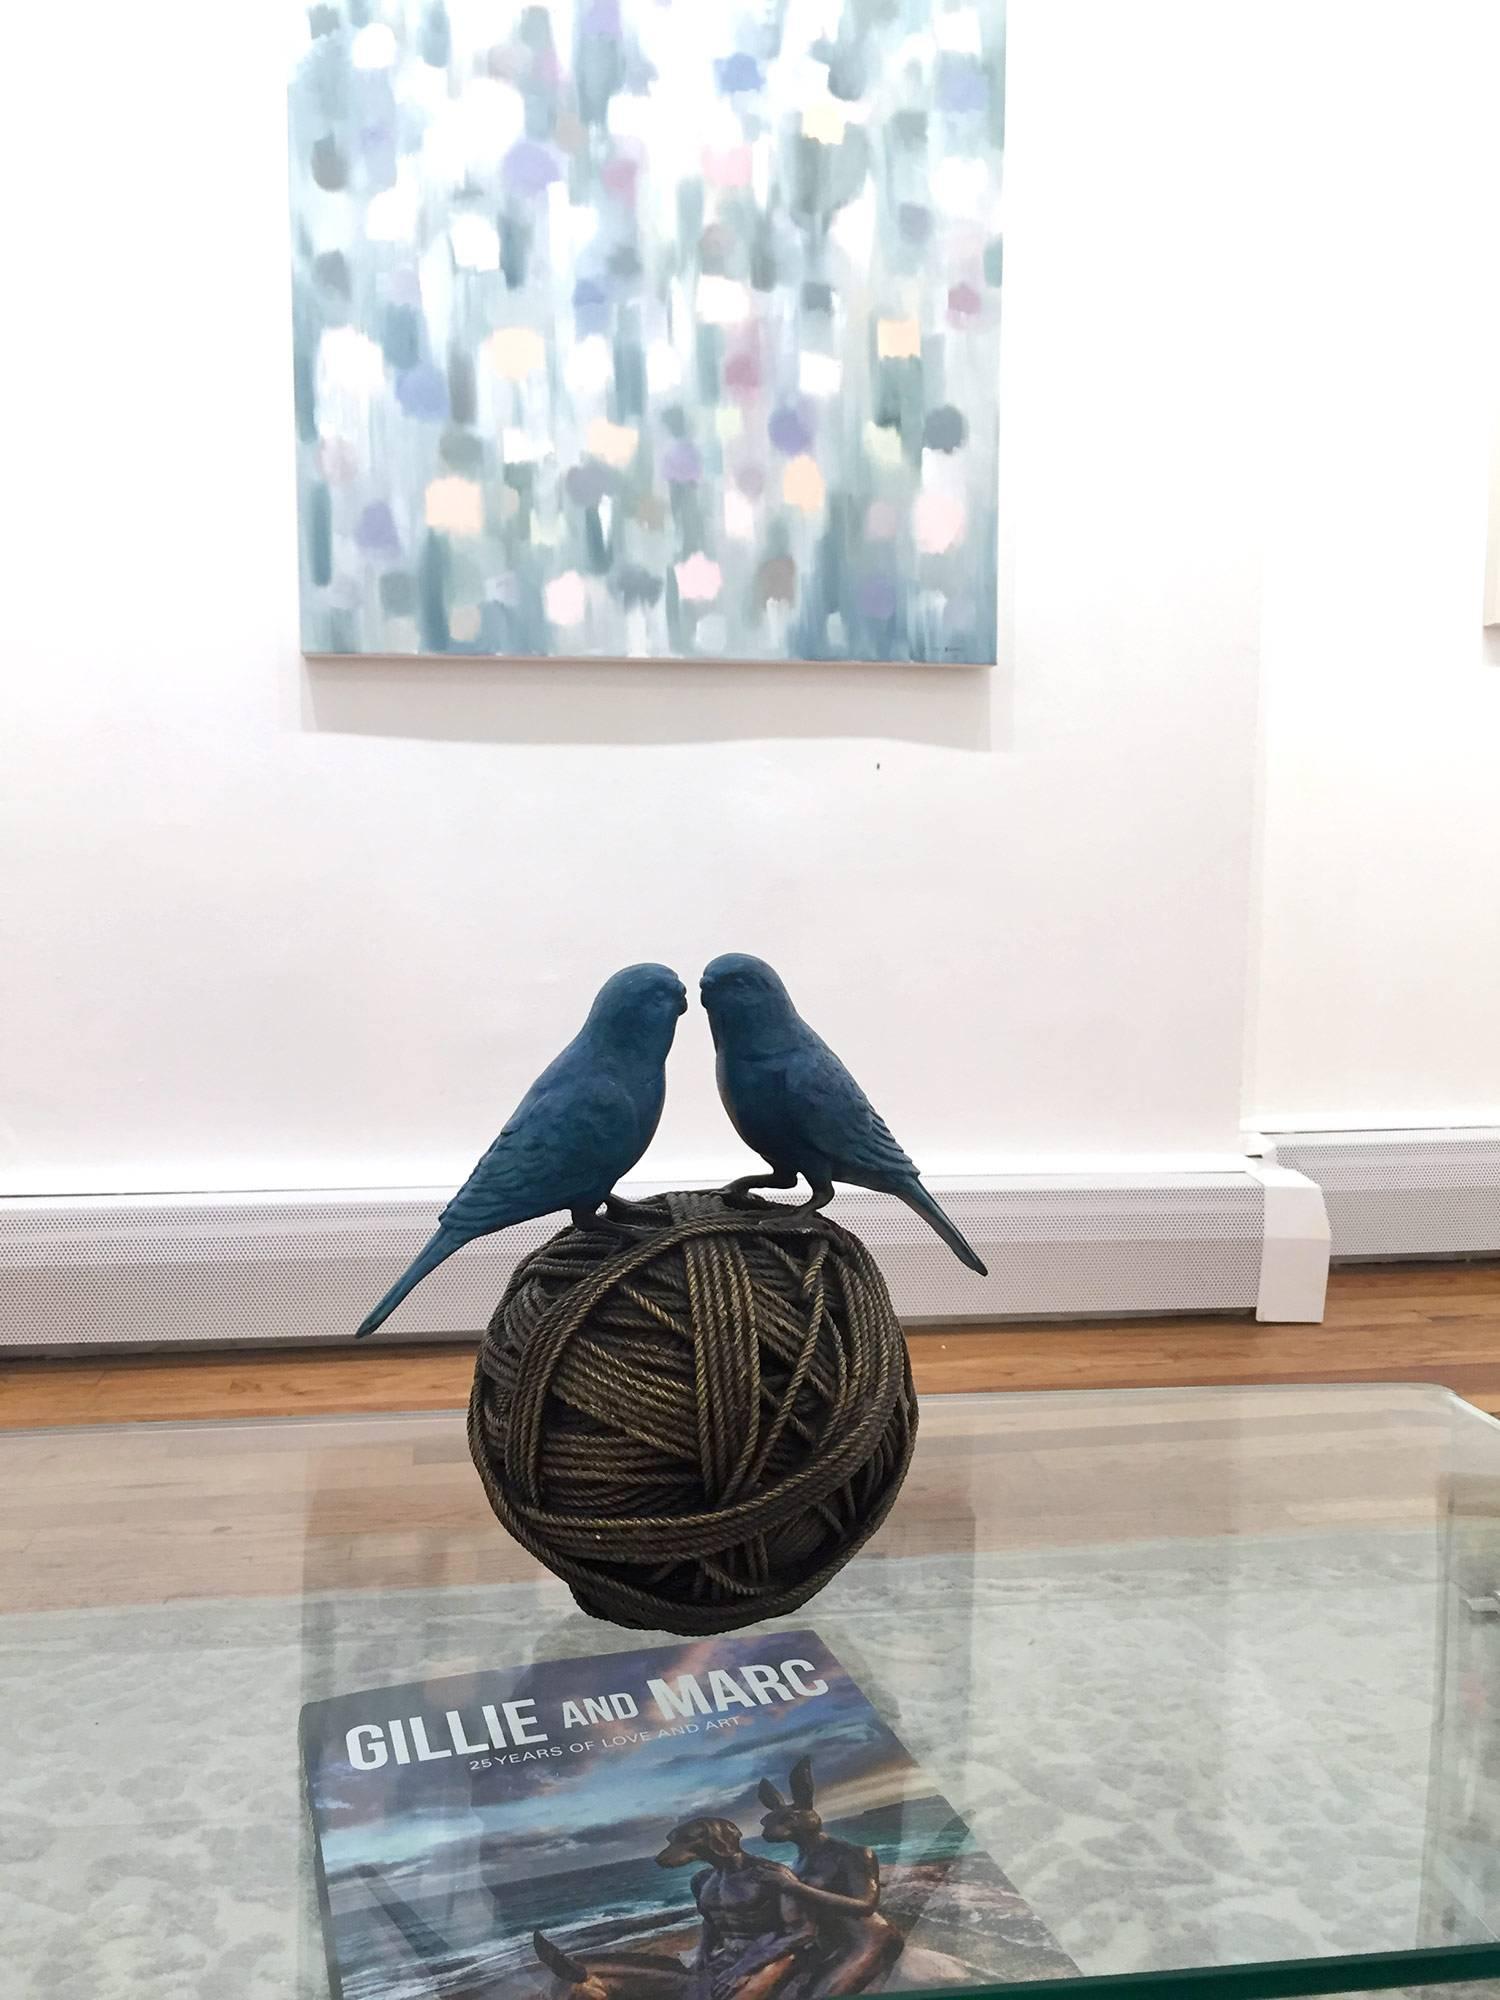 A wonderful yet very playful piece depicting 2 budgies on a ball of rope from Gillie and Marc's collection of artistic icons, which has picked up much esteem across the globe. Here we find this very balanced piece as the birds are facing each other